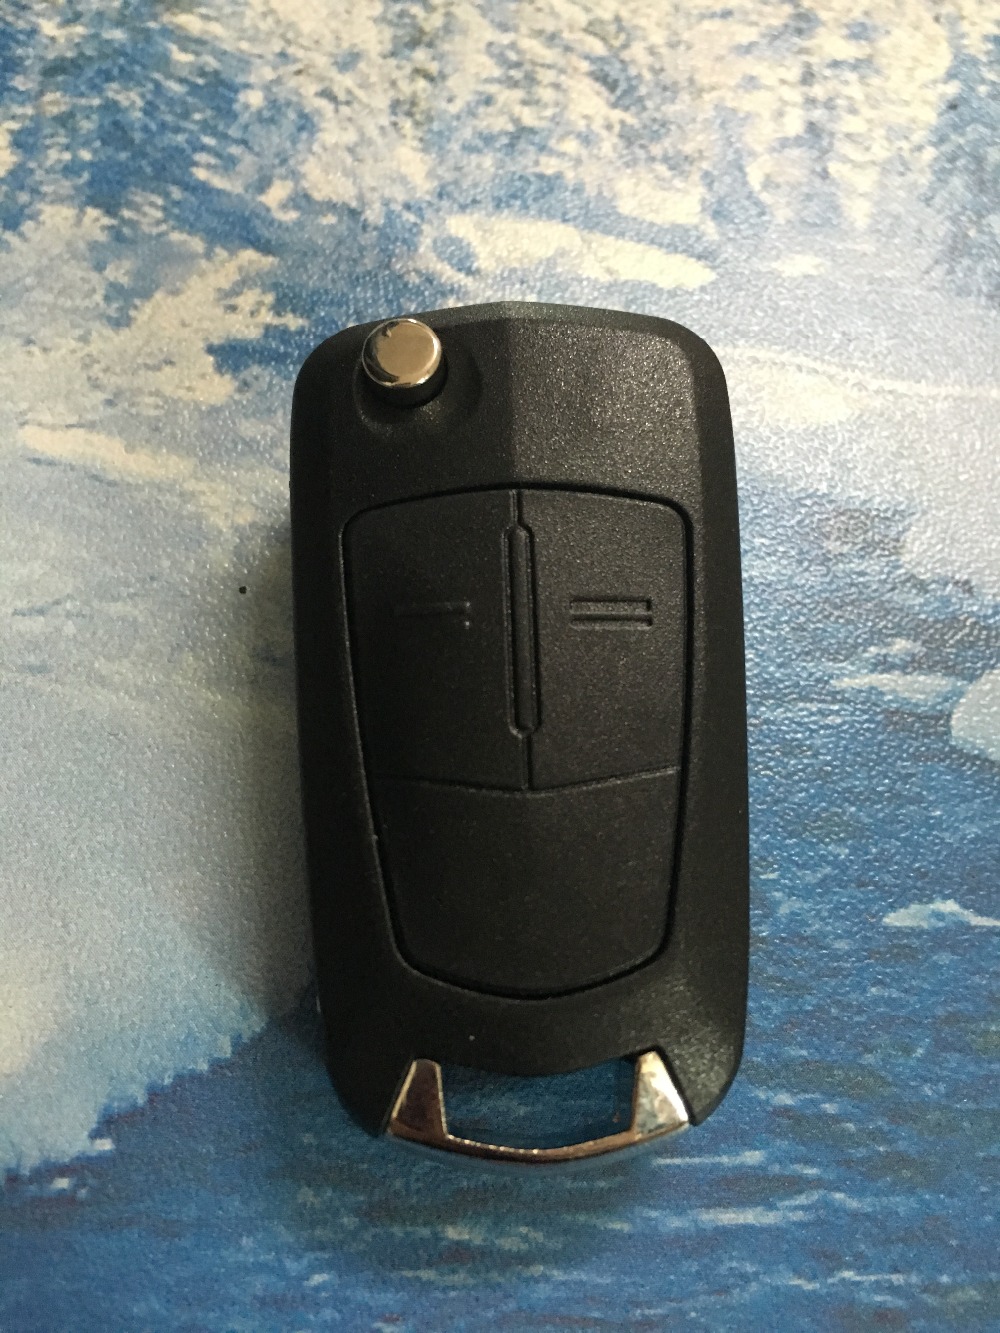 Image of Uncut 2 Buttons Flip Remote Key Shell Case Blank Cover With Battery Clip Original Circuit Board Size HU100 Blade for Opel